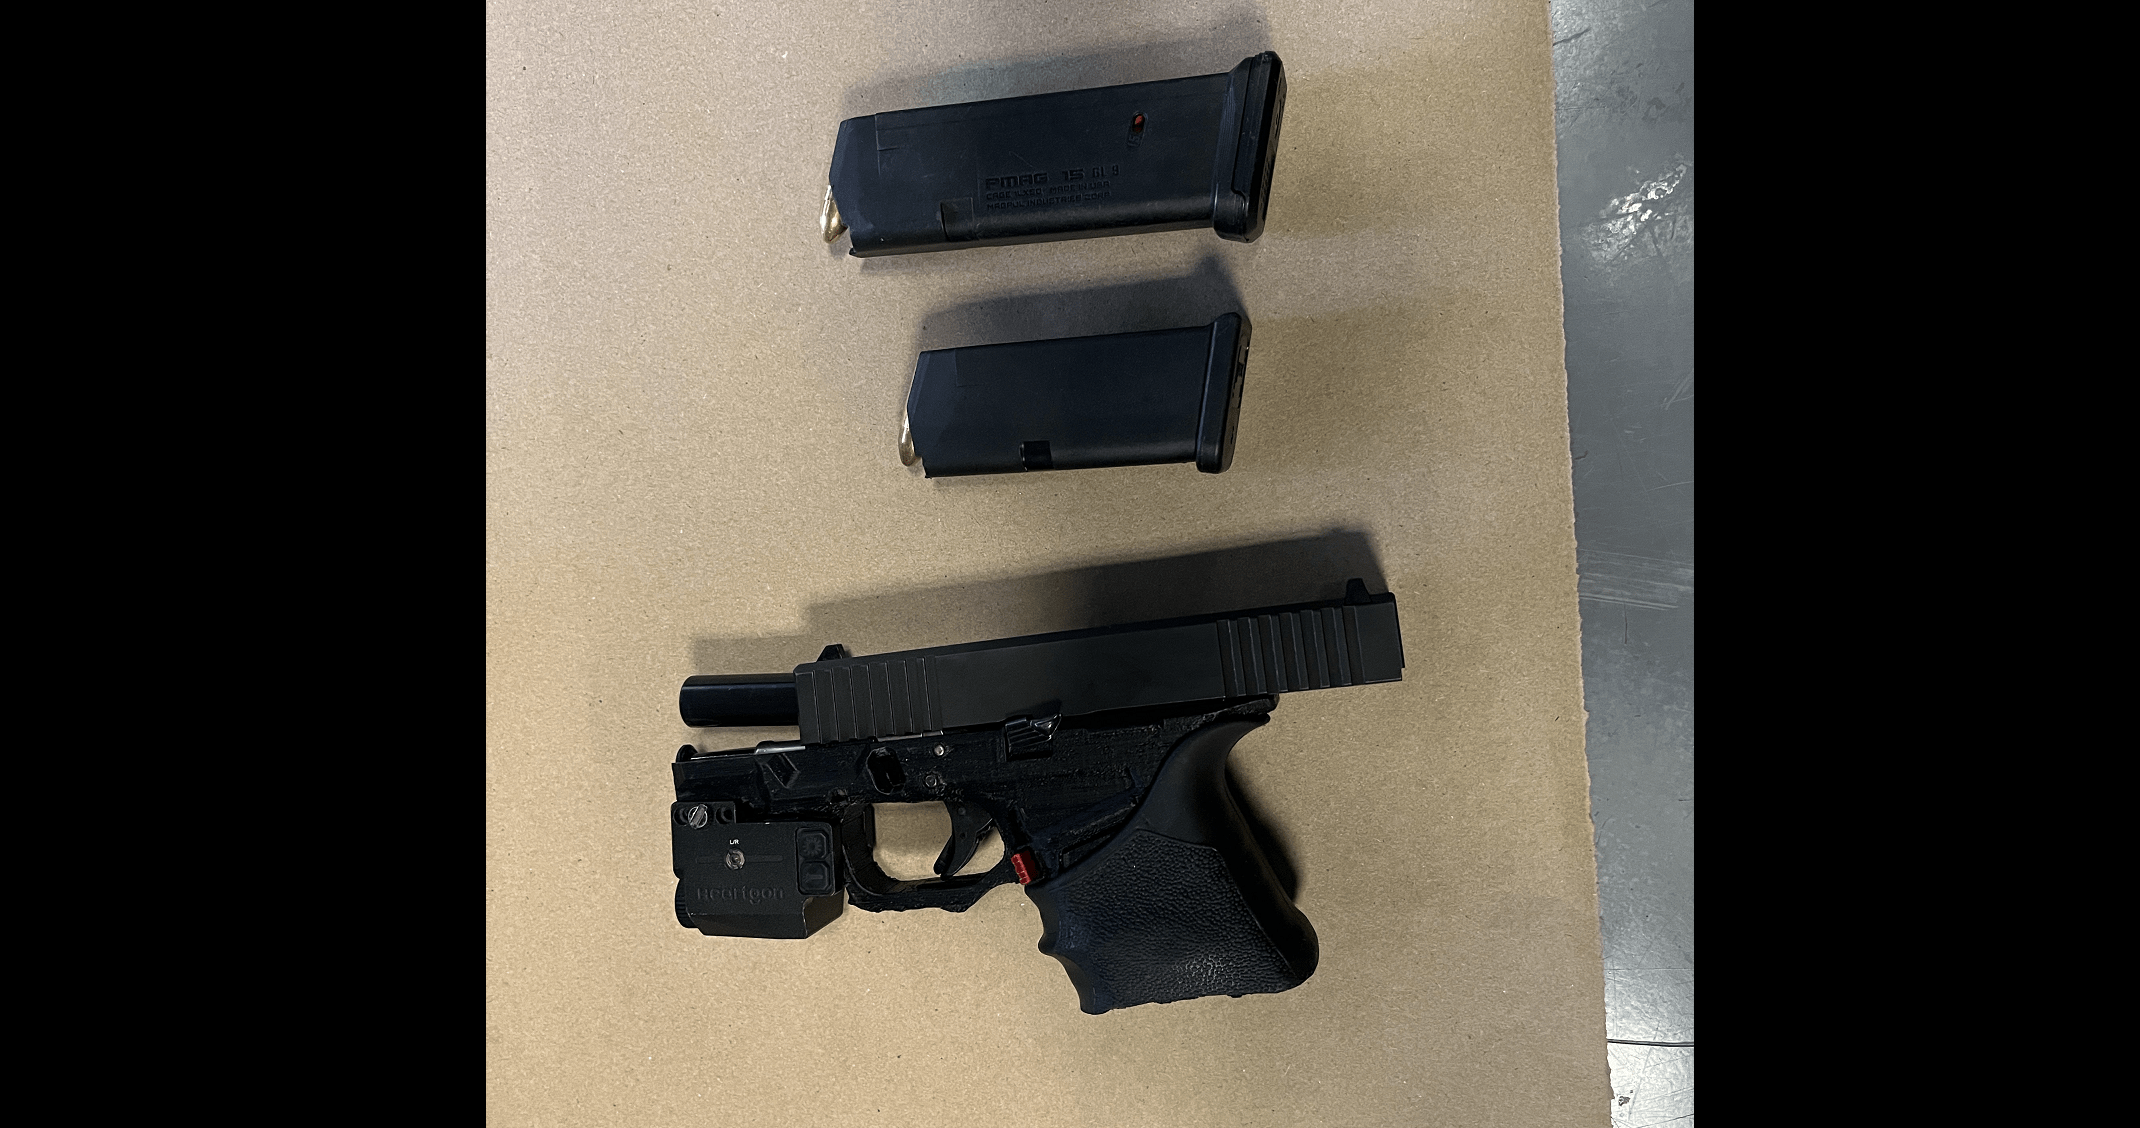 handgun-confiscated-from-17-year-old-male-driver-santa-rosa-police